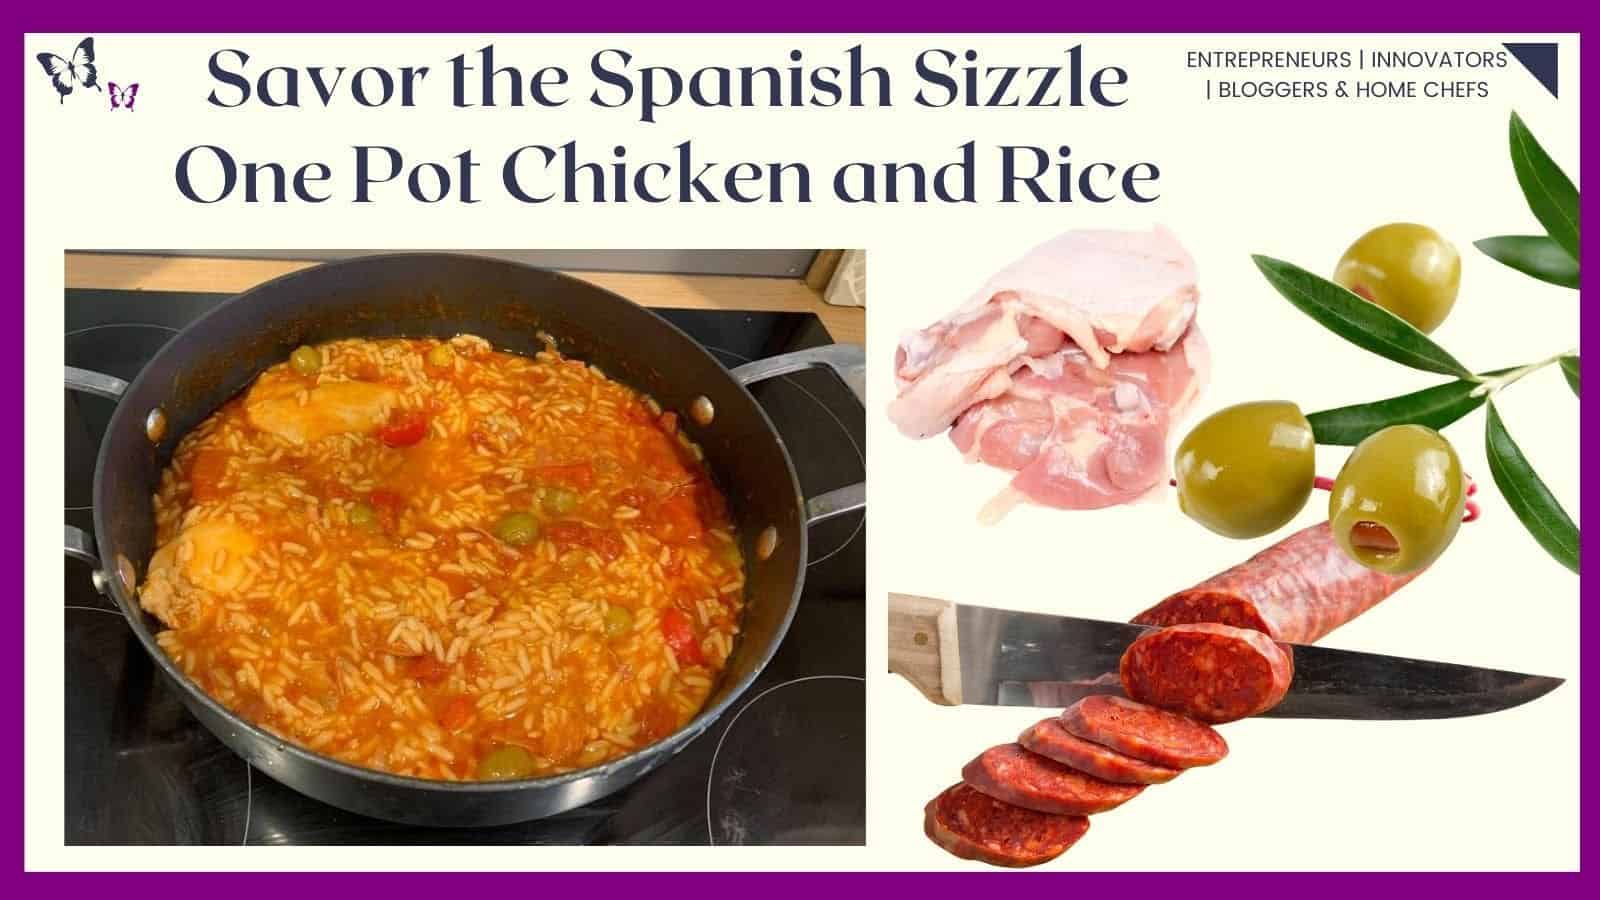 an image of a black cast-iron pan filled with One Pot Spanish Chicken and Rice